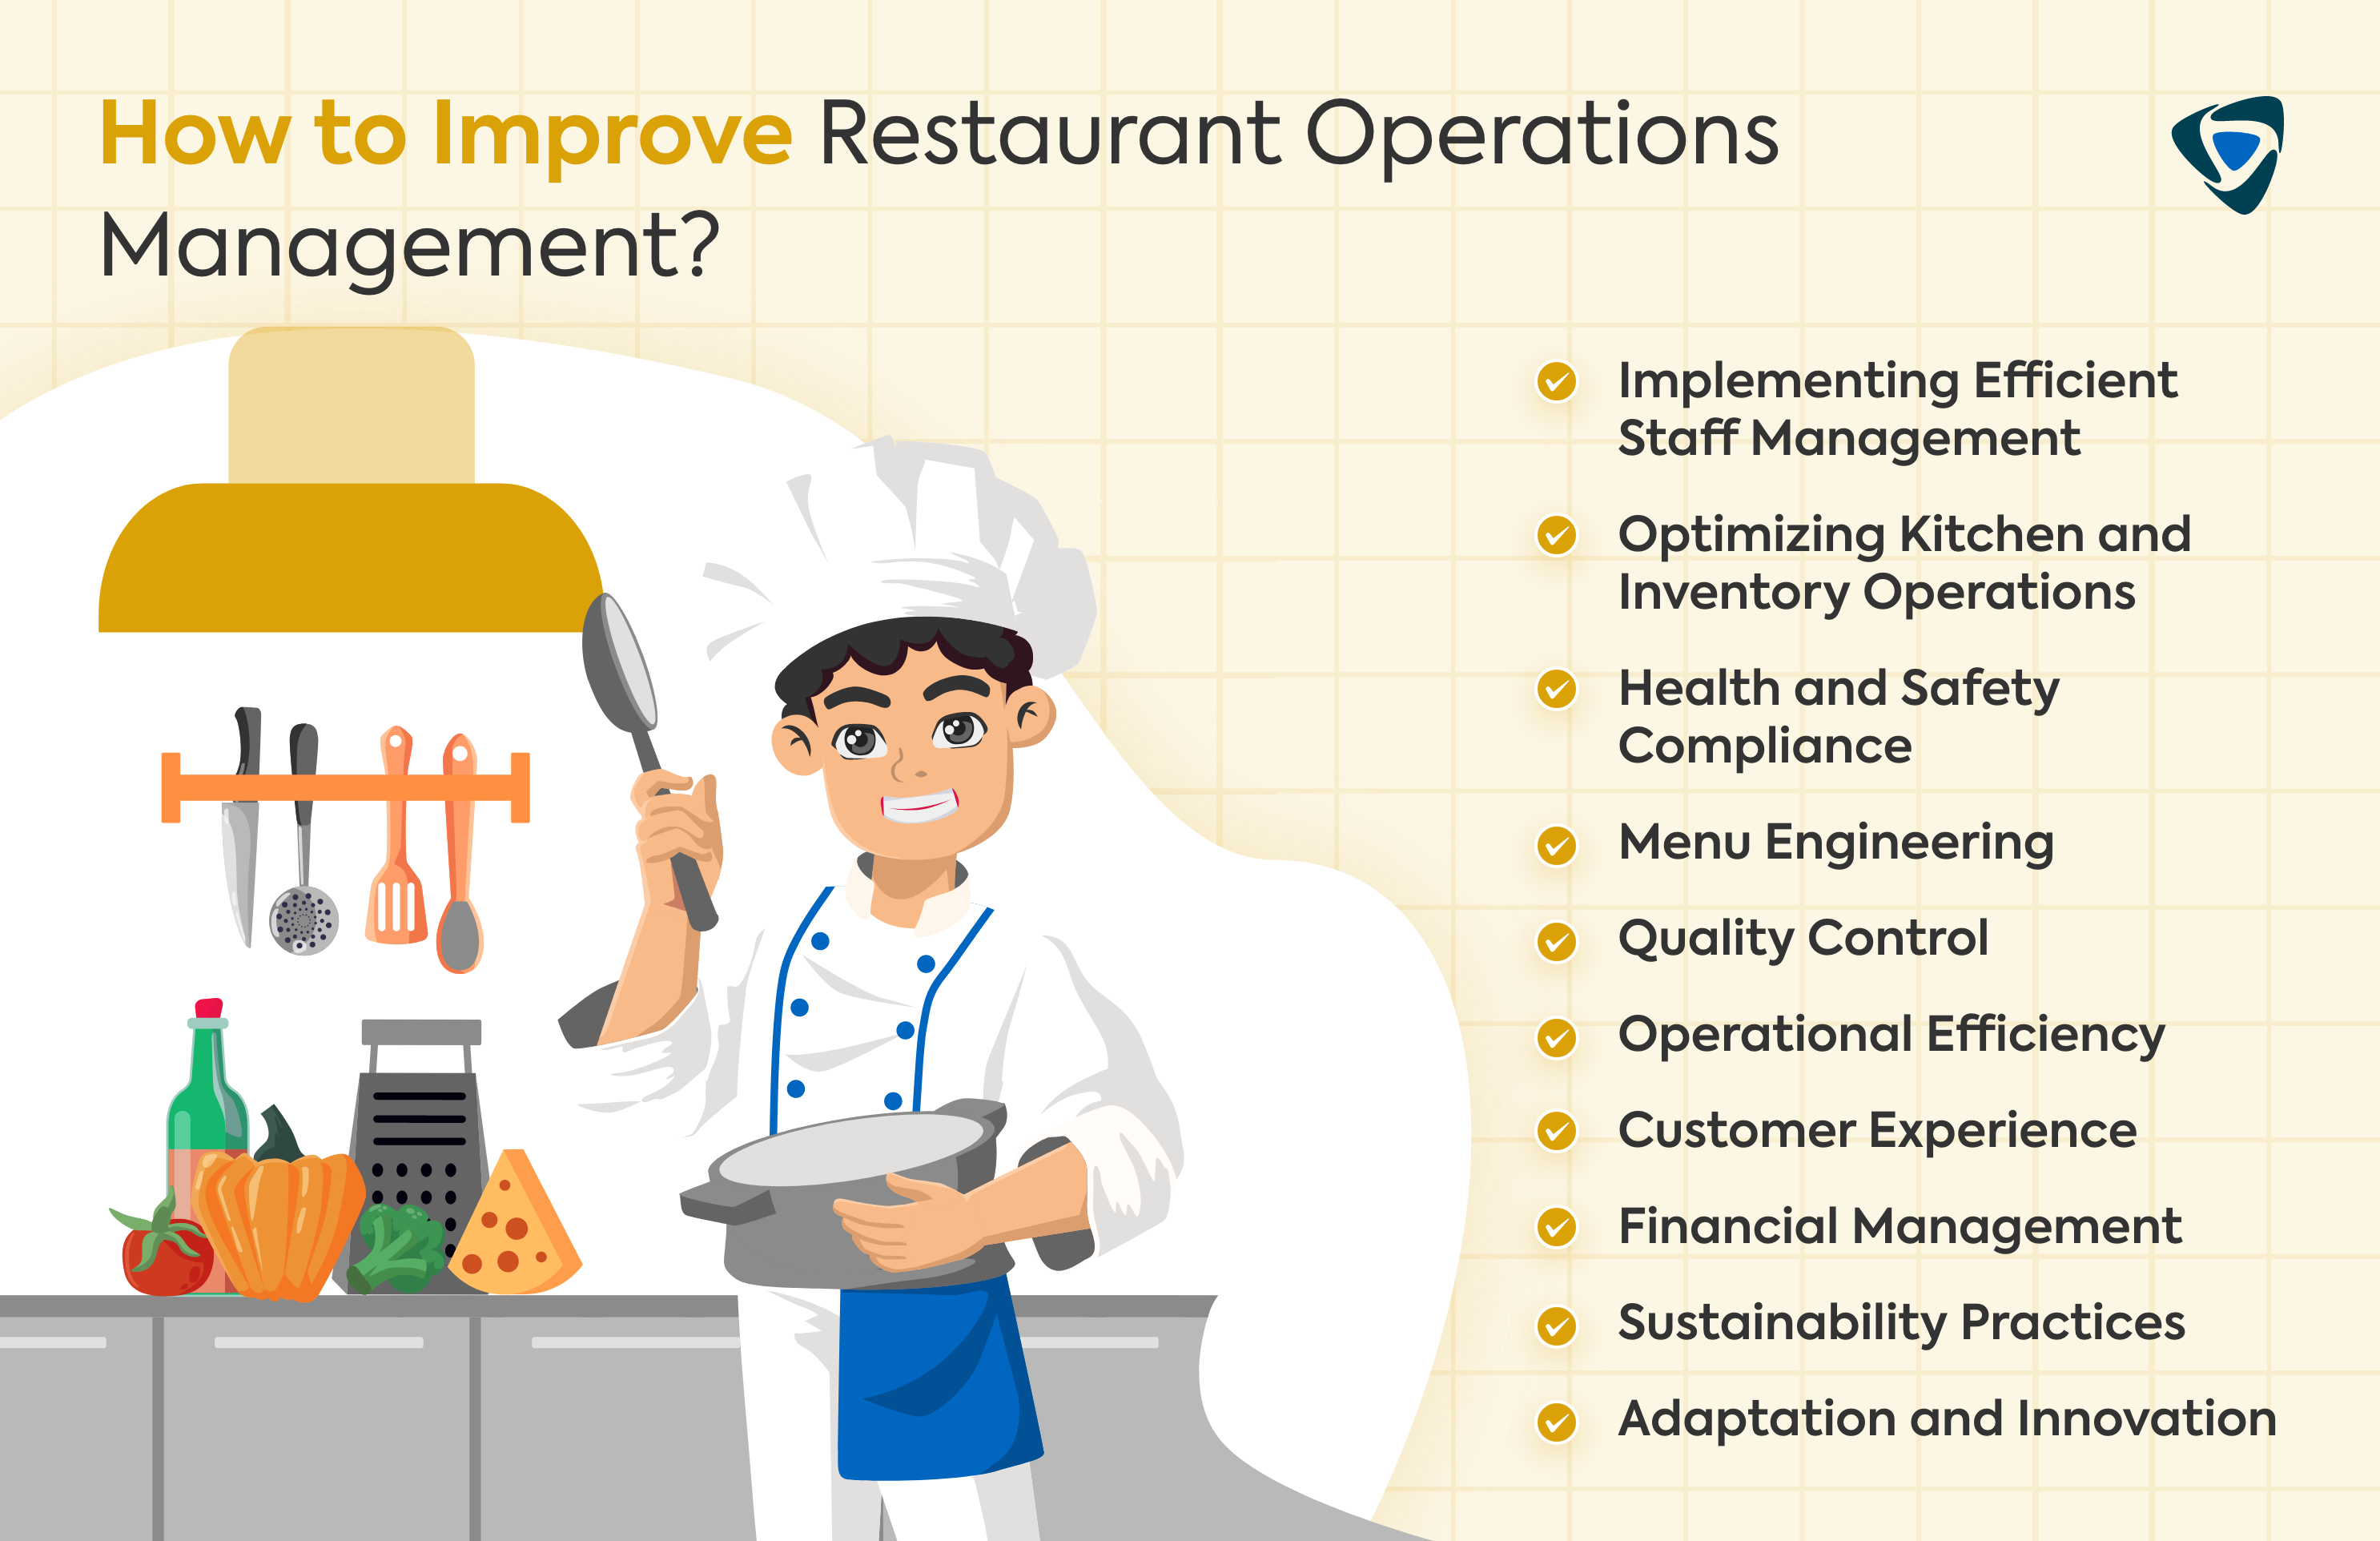 How to Improve Restaurant Operations Management